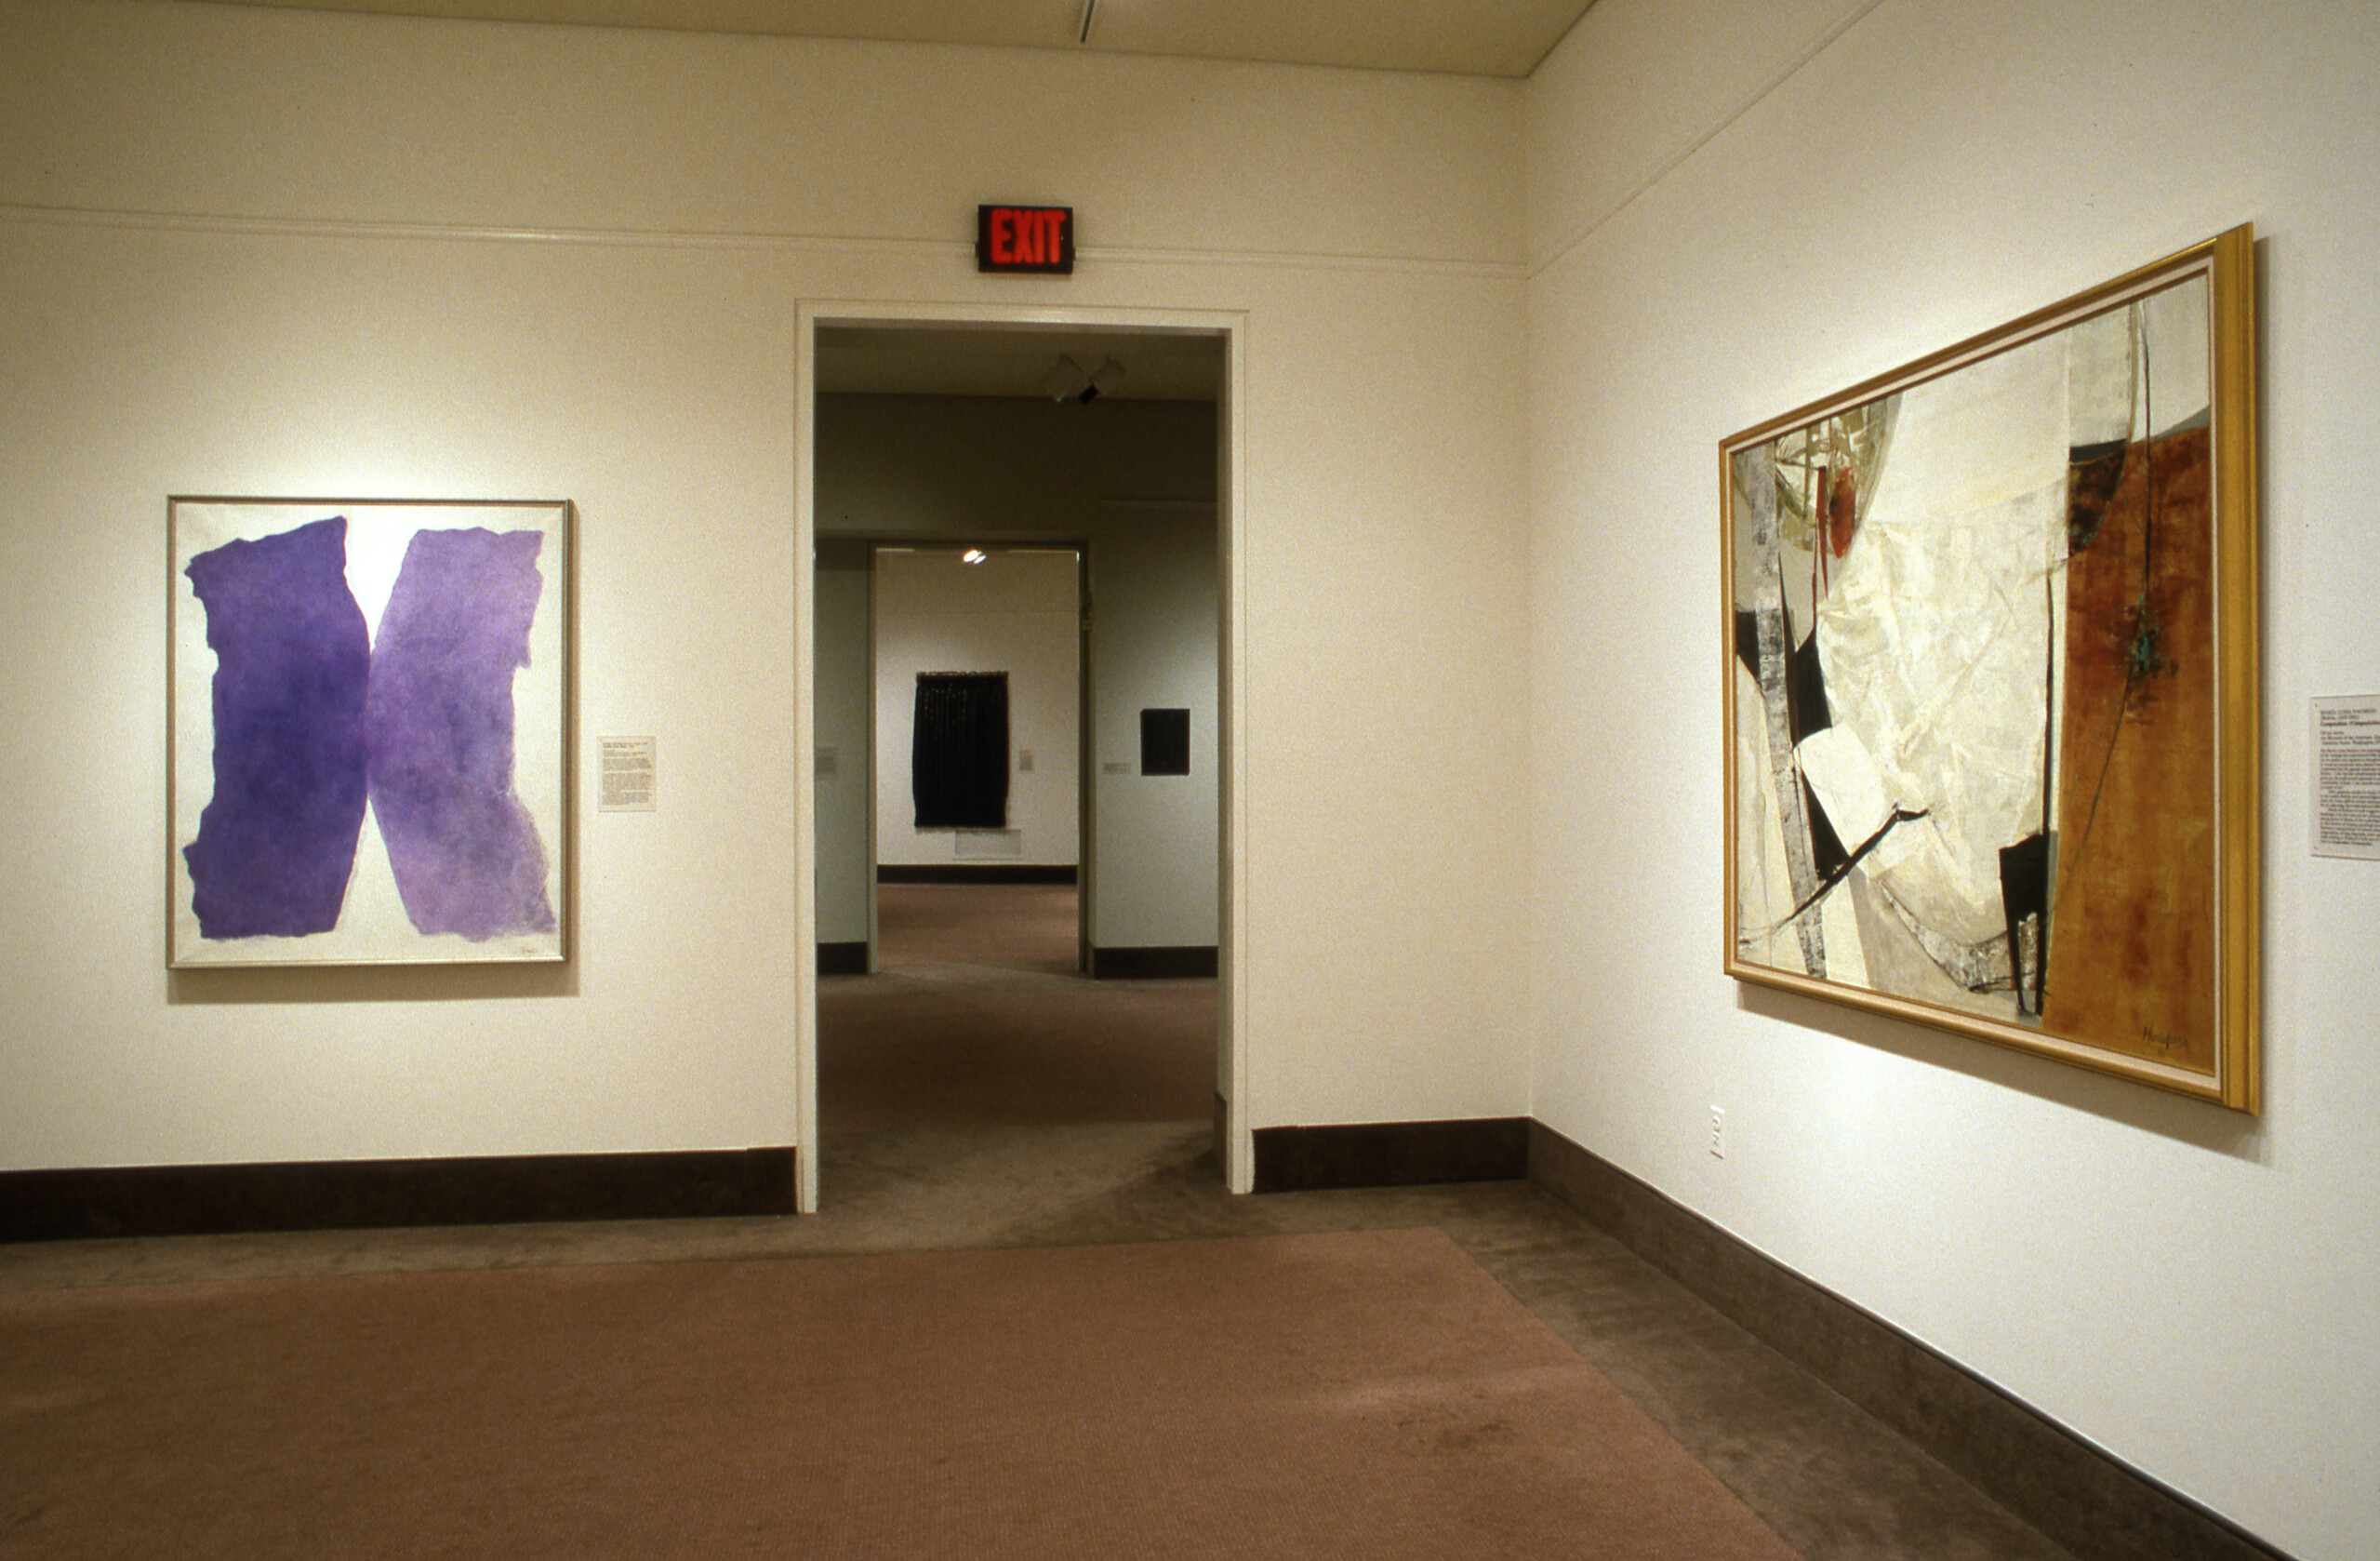 A view of a gallery space. Two artworks are hanging on opposite walls. One is an abstract painting in dark blue, and the other one is an abstract painting in white and brown shades.